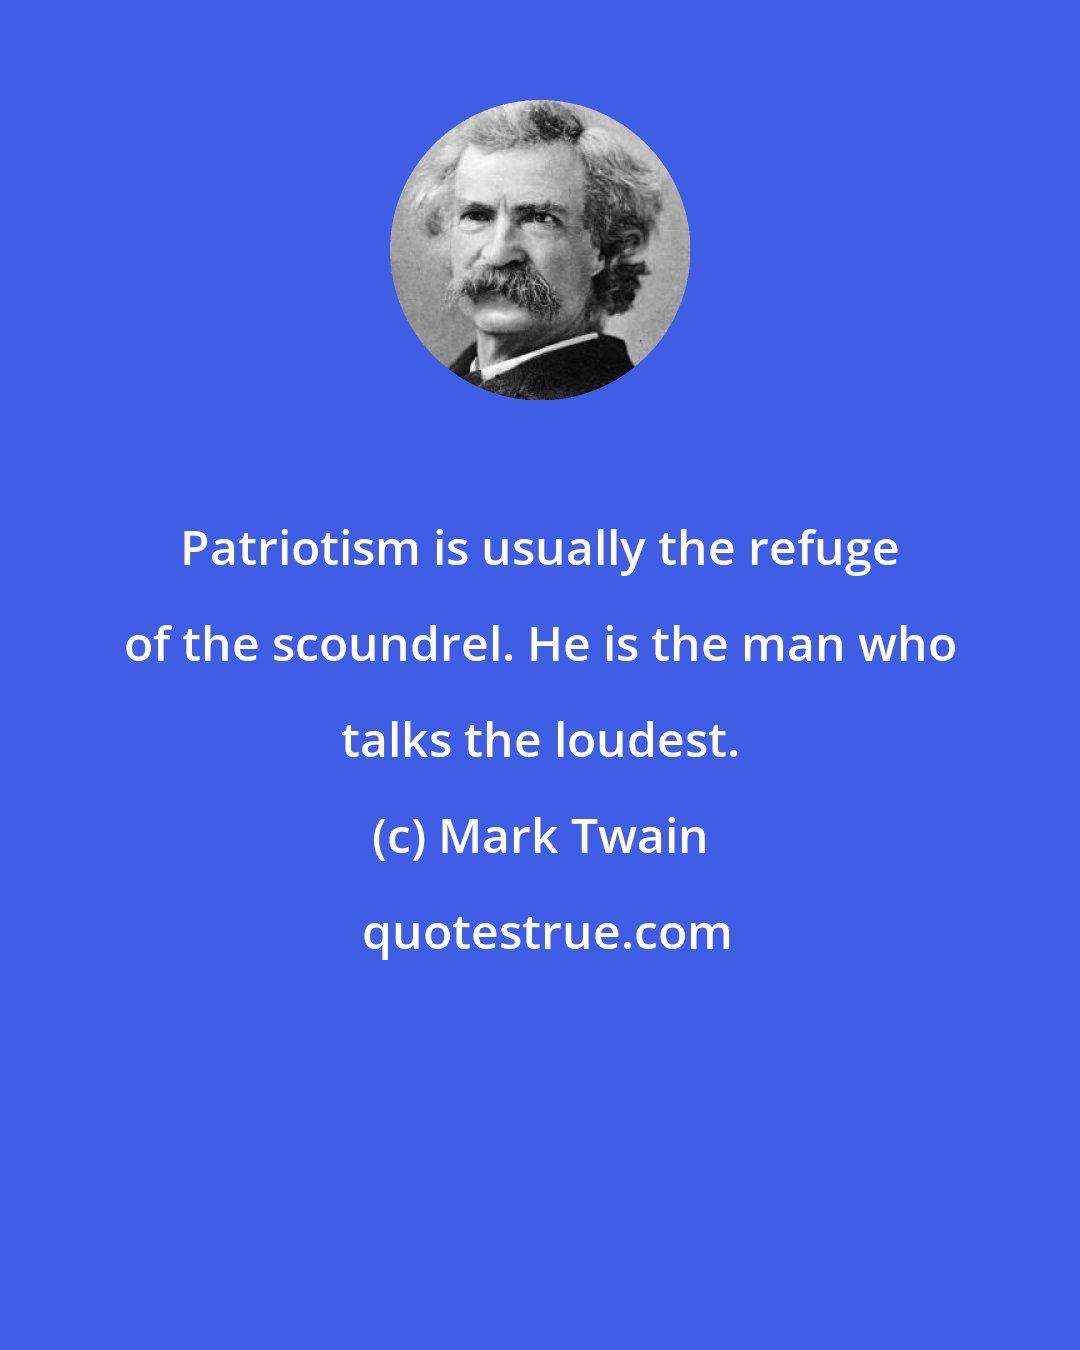 Mark Twain: Patriotism is usually the refuge of the scoundrel. He is the man who talks the loudest.